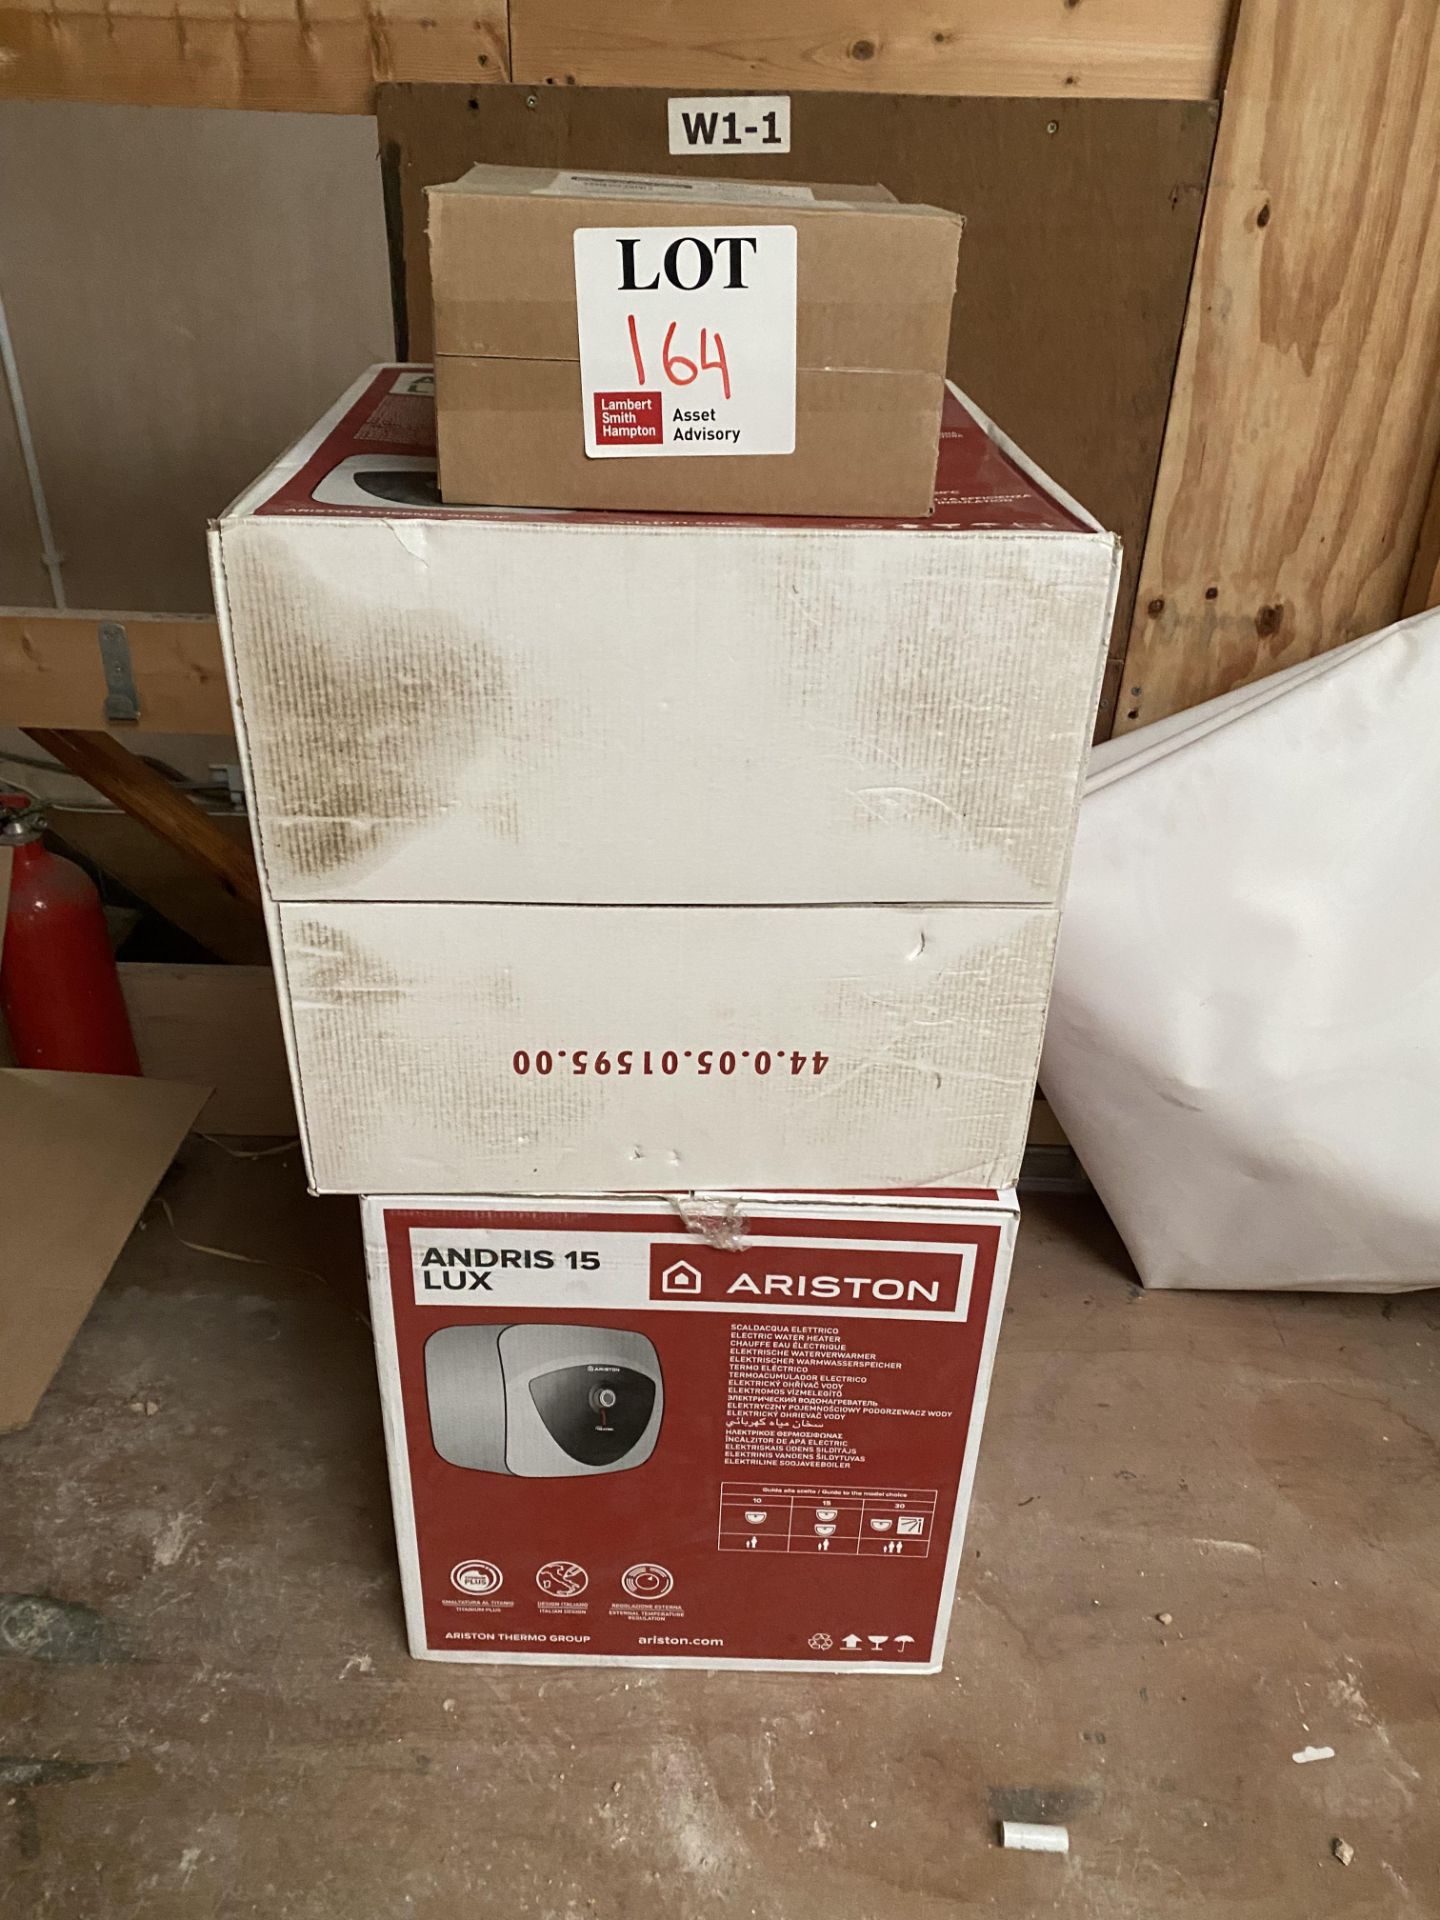 Two Ariston Andris 15 Lux electric water heaters